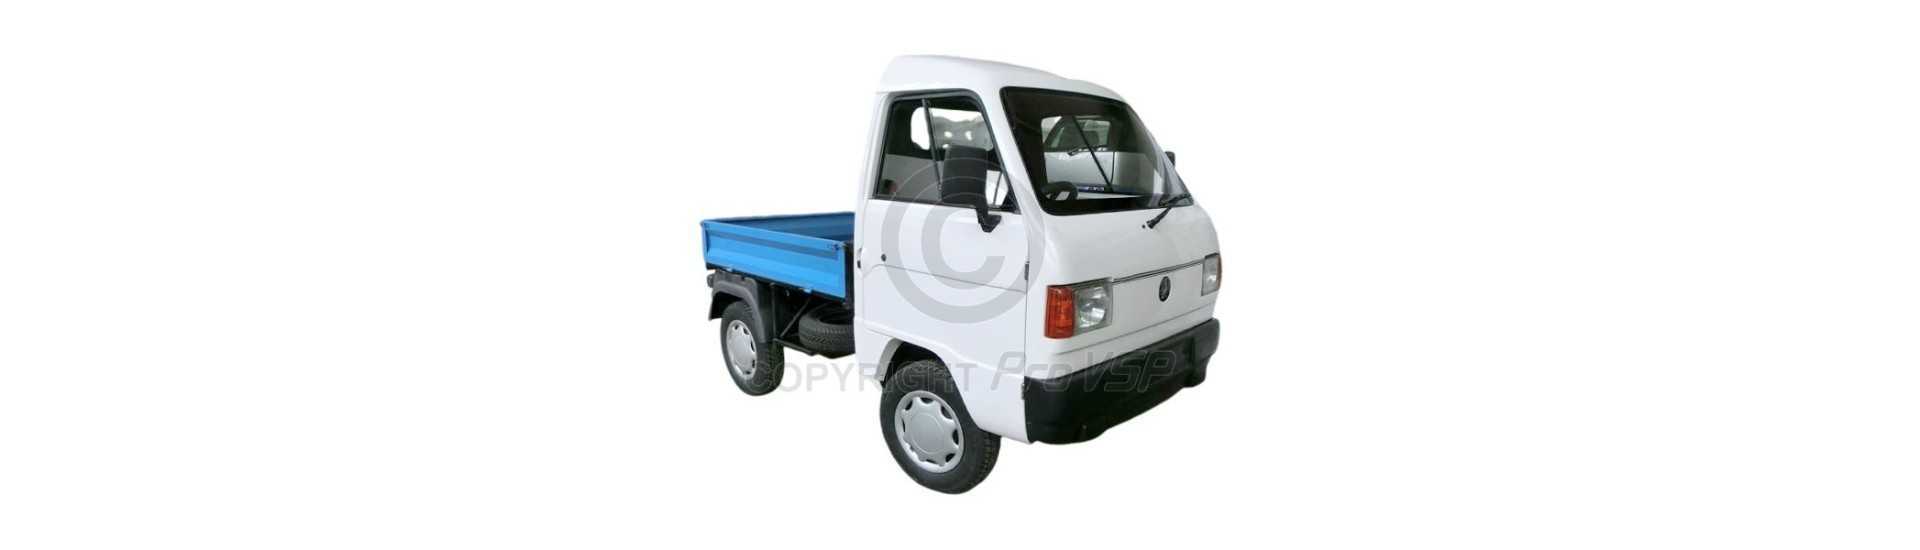 Bodywork at the best price without a permit Microcar Sherpa 1